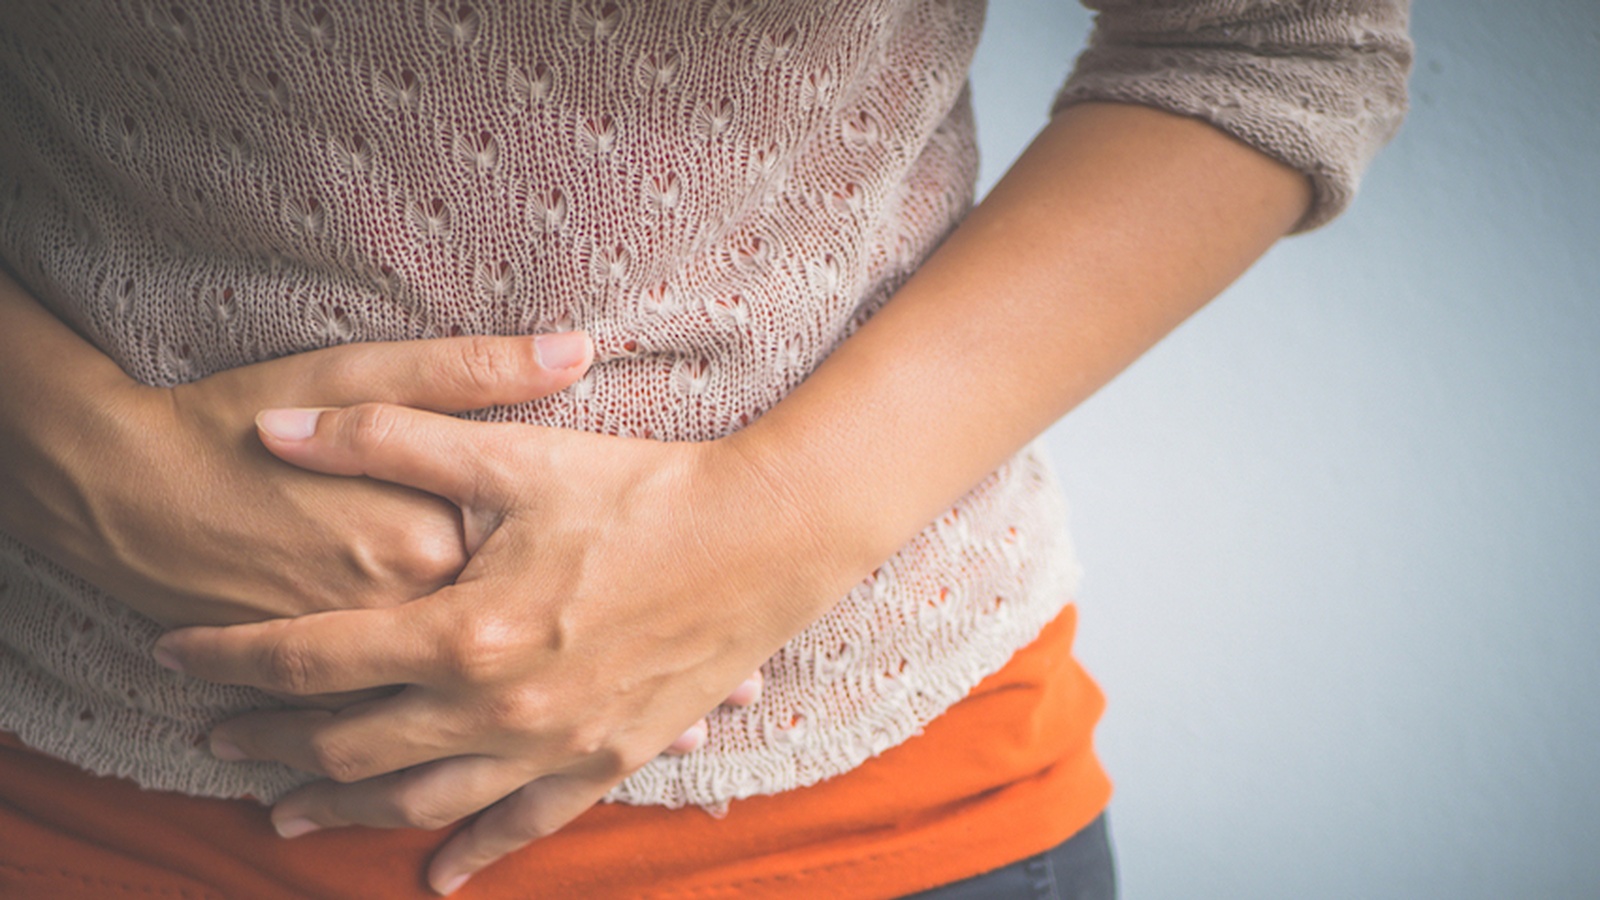 3 Simple Tricks to Eliminate Gas, Bloating, & Constipation